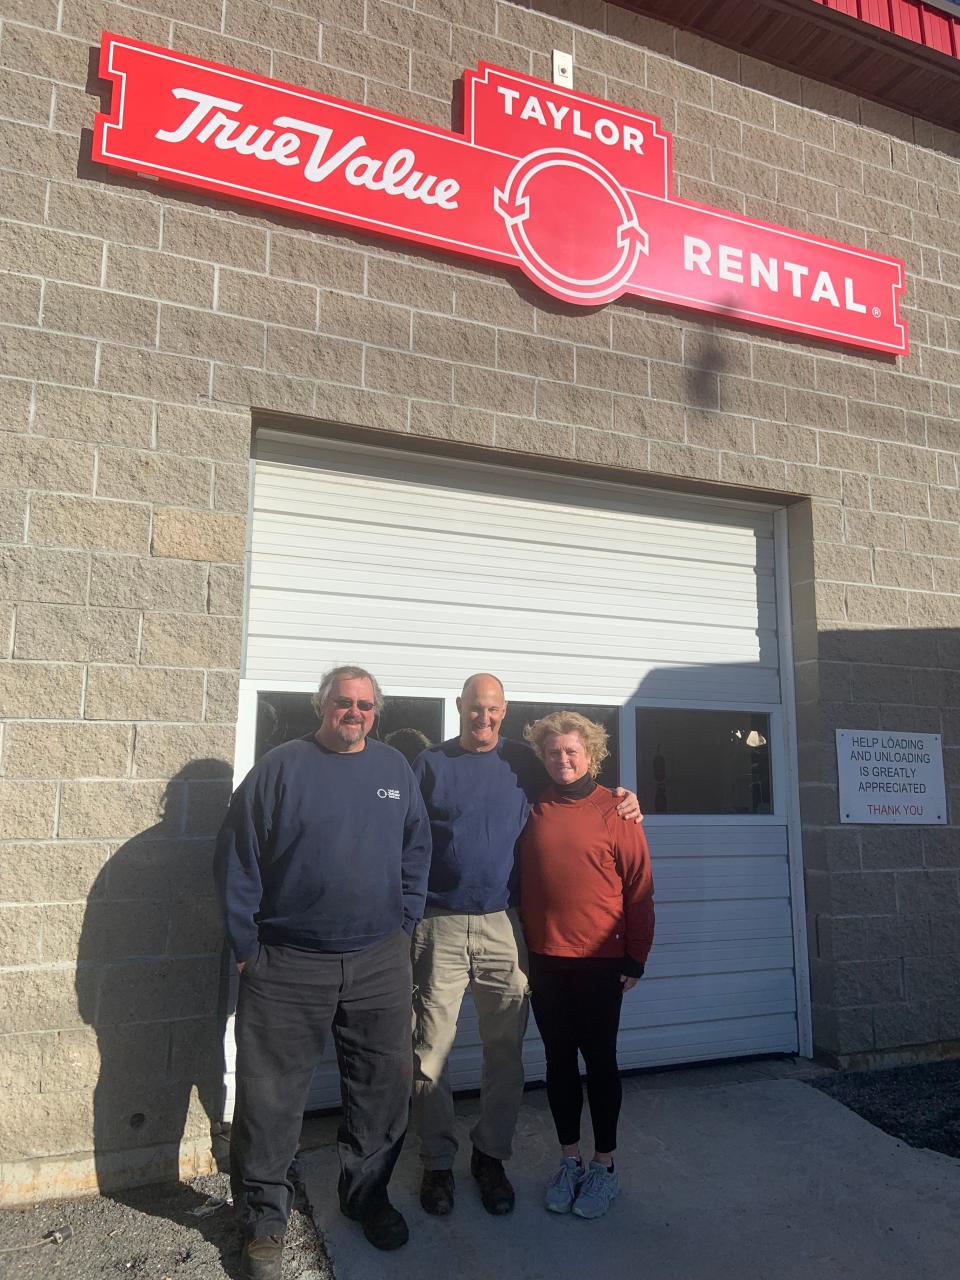 After 50 years in business, Taylor Rental in Gardner is closing its doors. From left: longtime employee Greg Tardiff and owners Pete and Madeline Gamache.